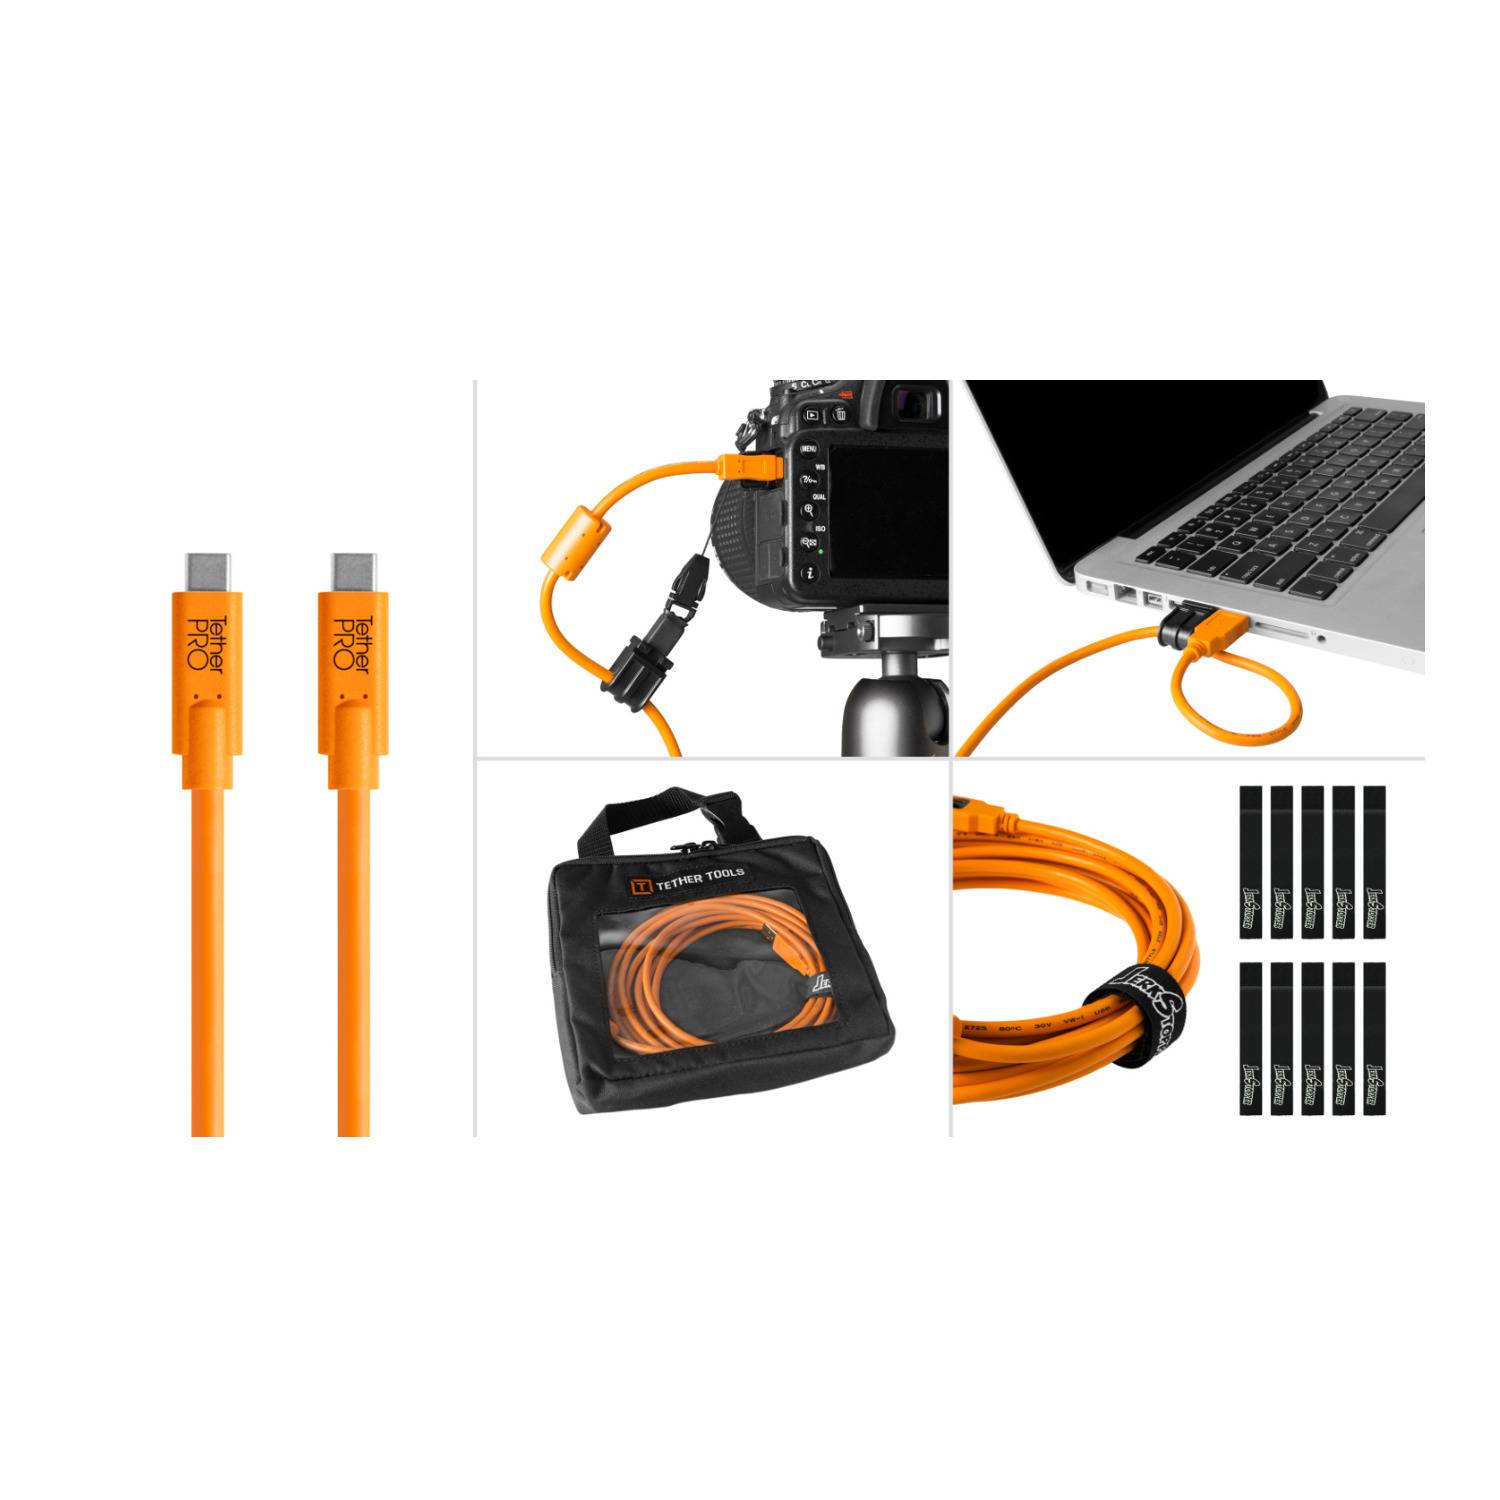 Tether Tools Starter Tethering Kit with USB-C to USB-C Cable (15-Feet/Orange)